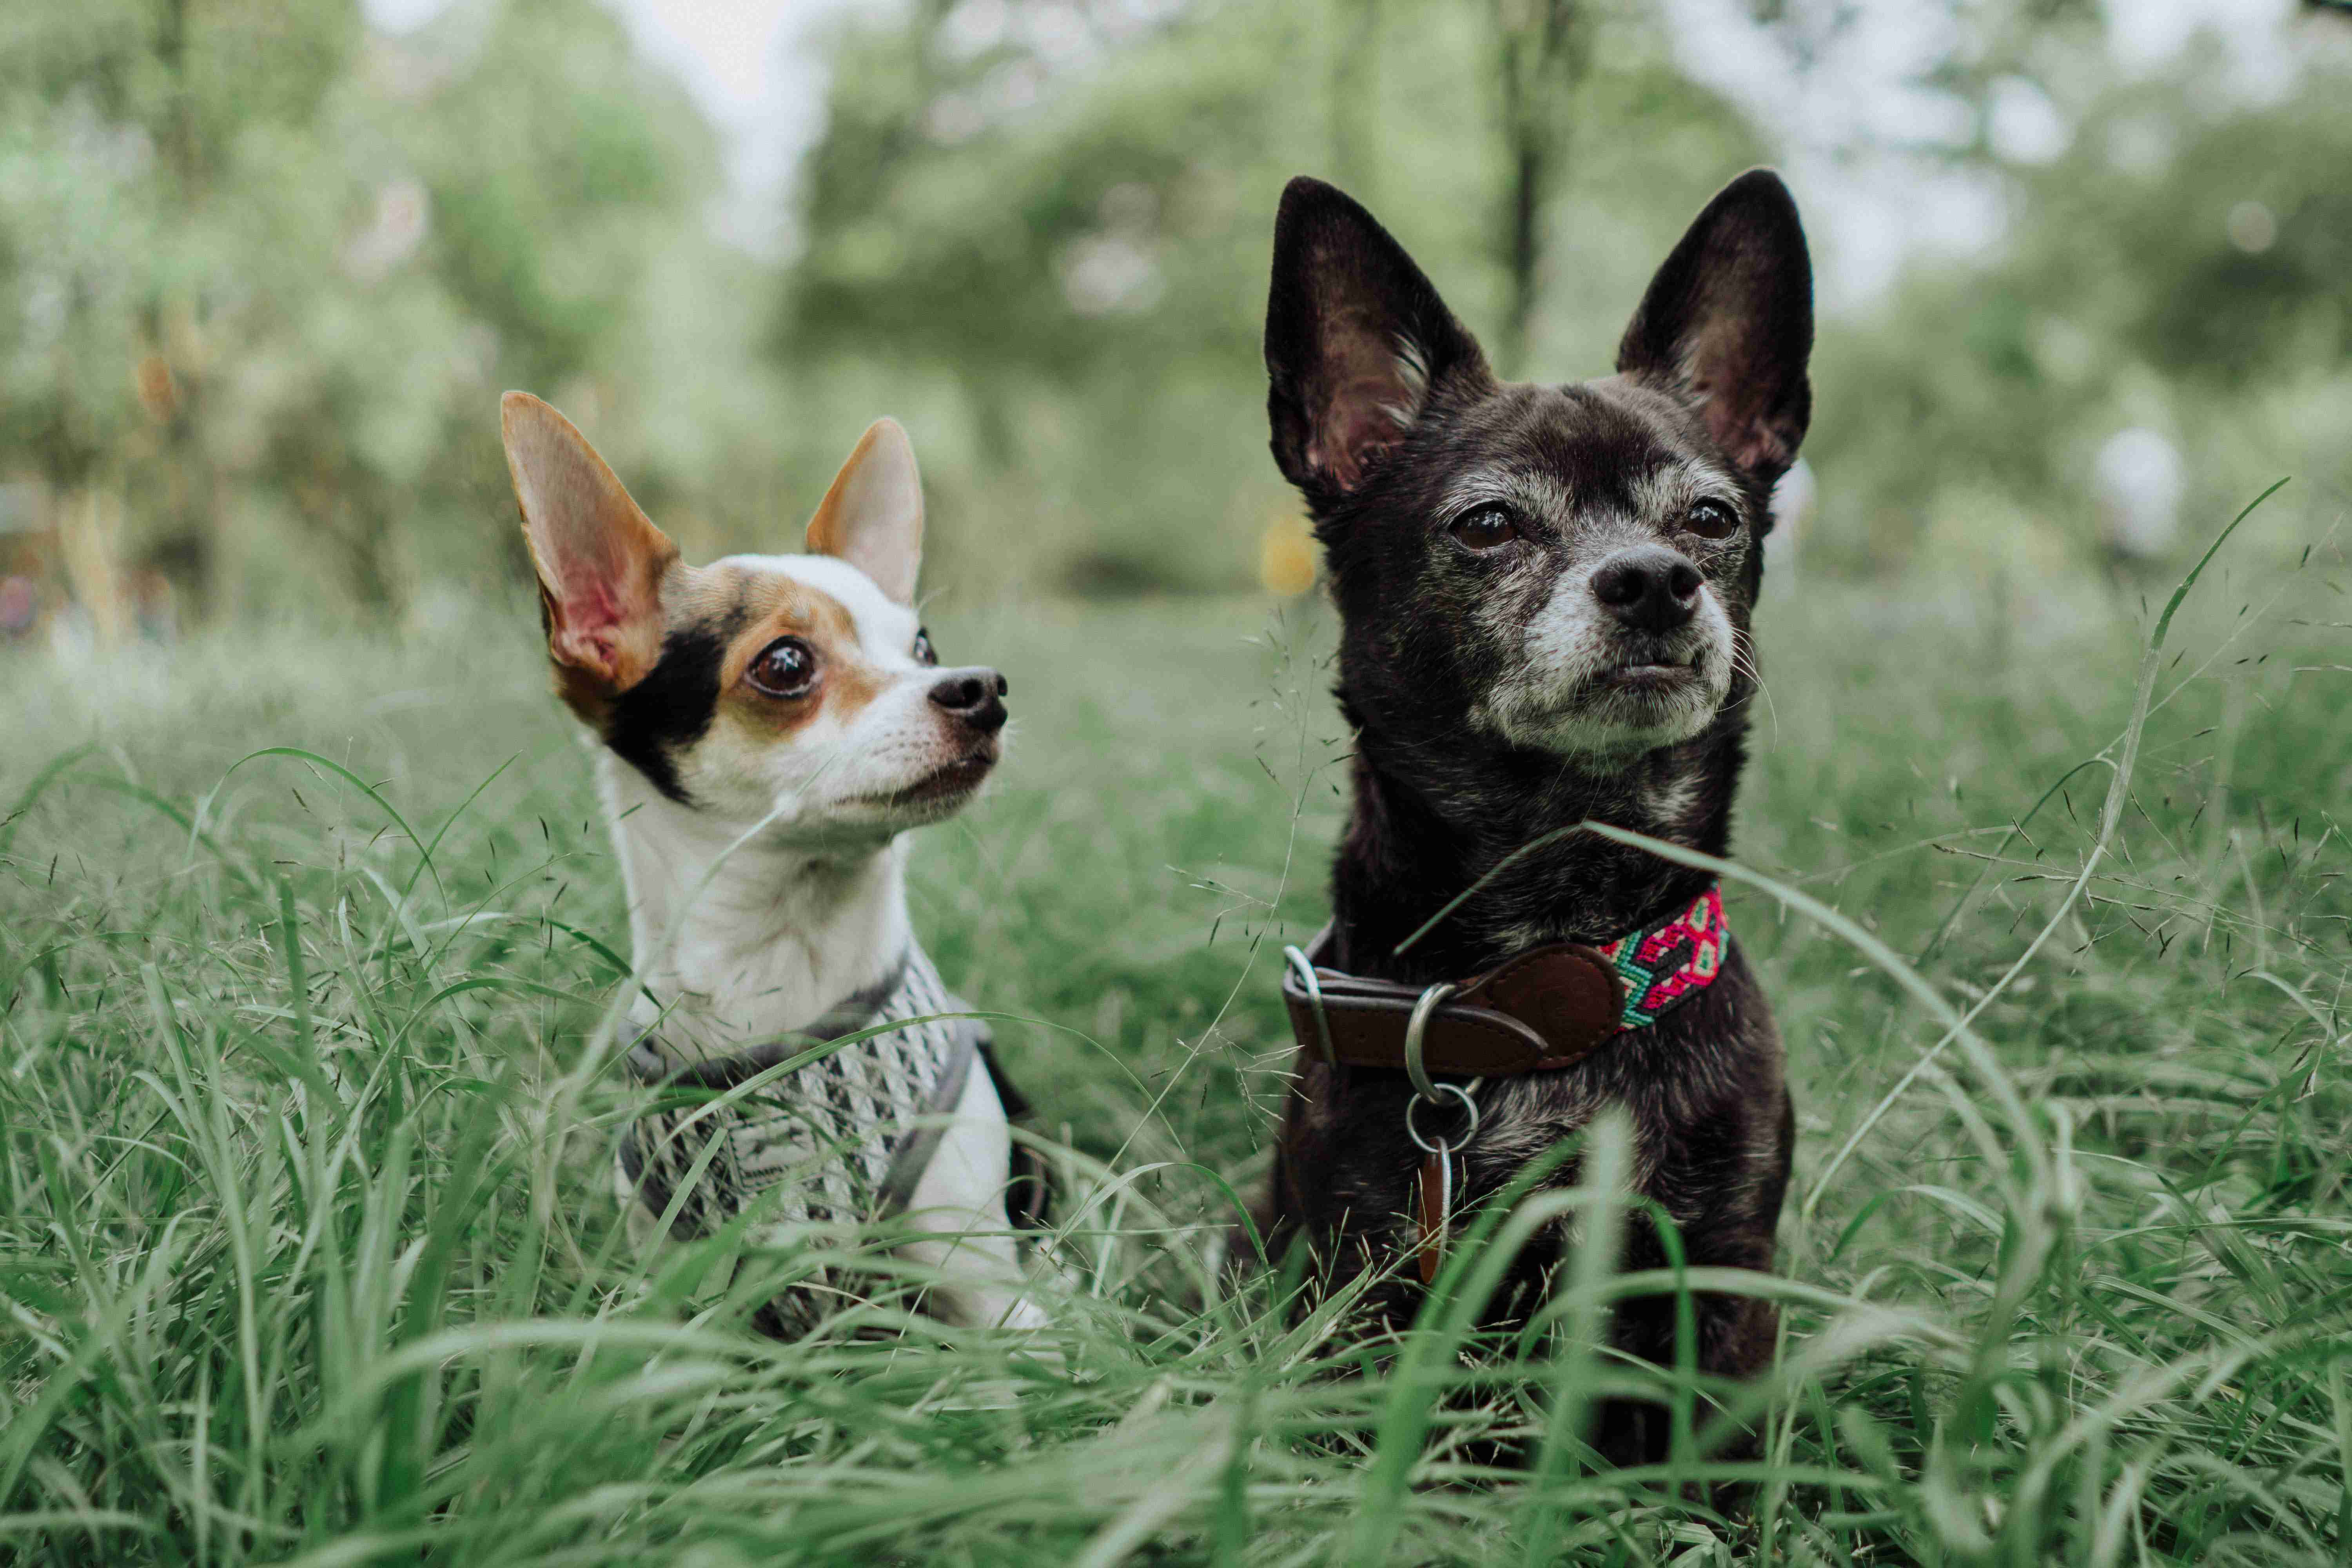 How can I teach my Chihuahua to be less possessive and aggressive over toys or food?